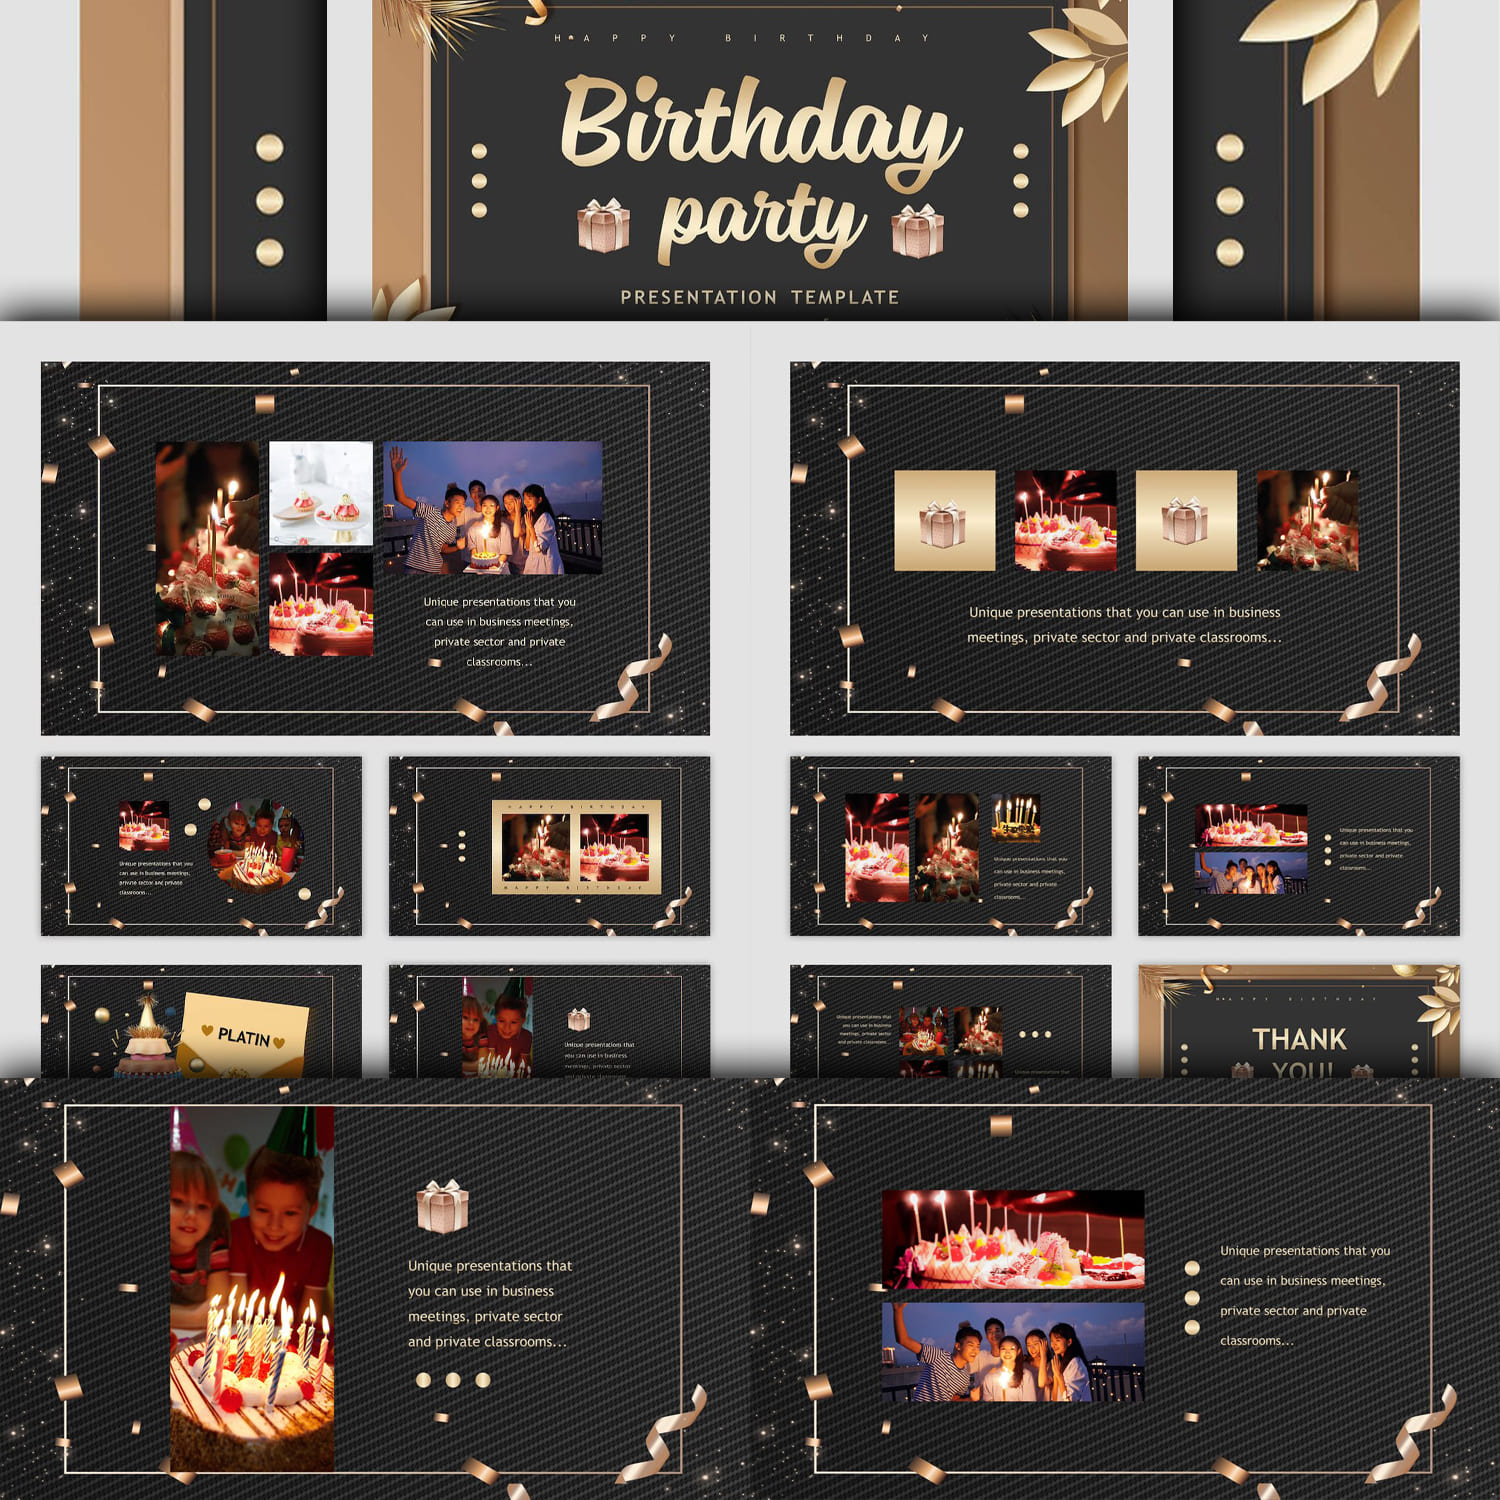 Birthday Party Events Powerpoint Template.